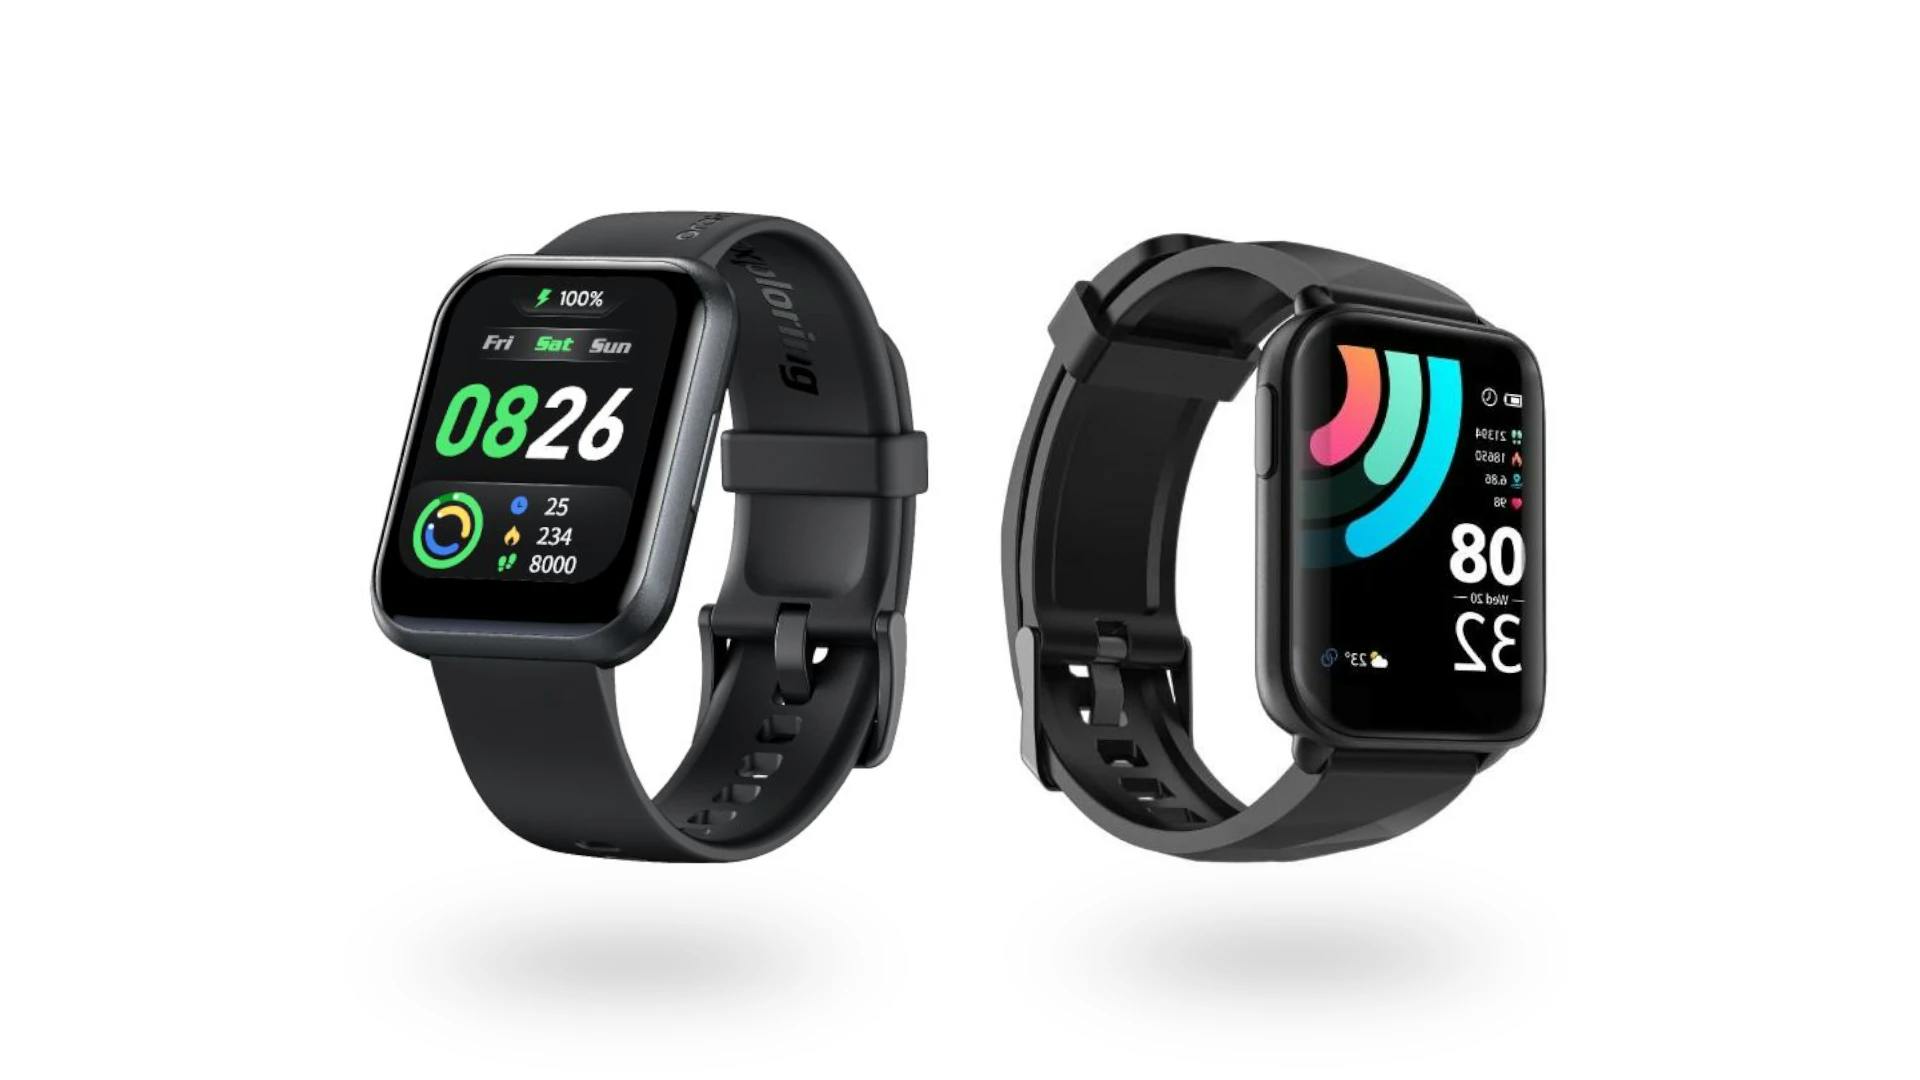 https://res.cloudinary.com/all-roundreview/image/upload/v1659344931/reviews/oraimo-watch-2-pro-vs-oraimo-smartwatch-2-osw-16.webp